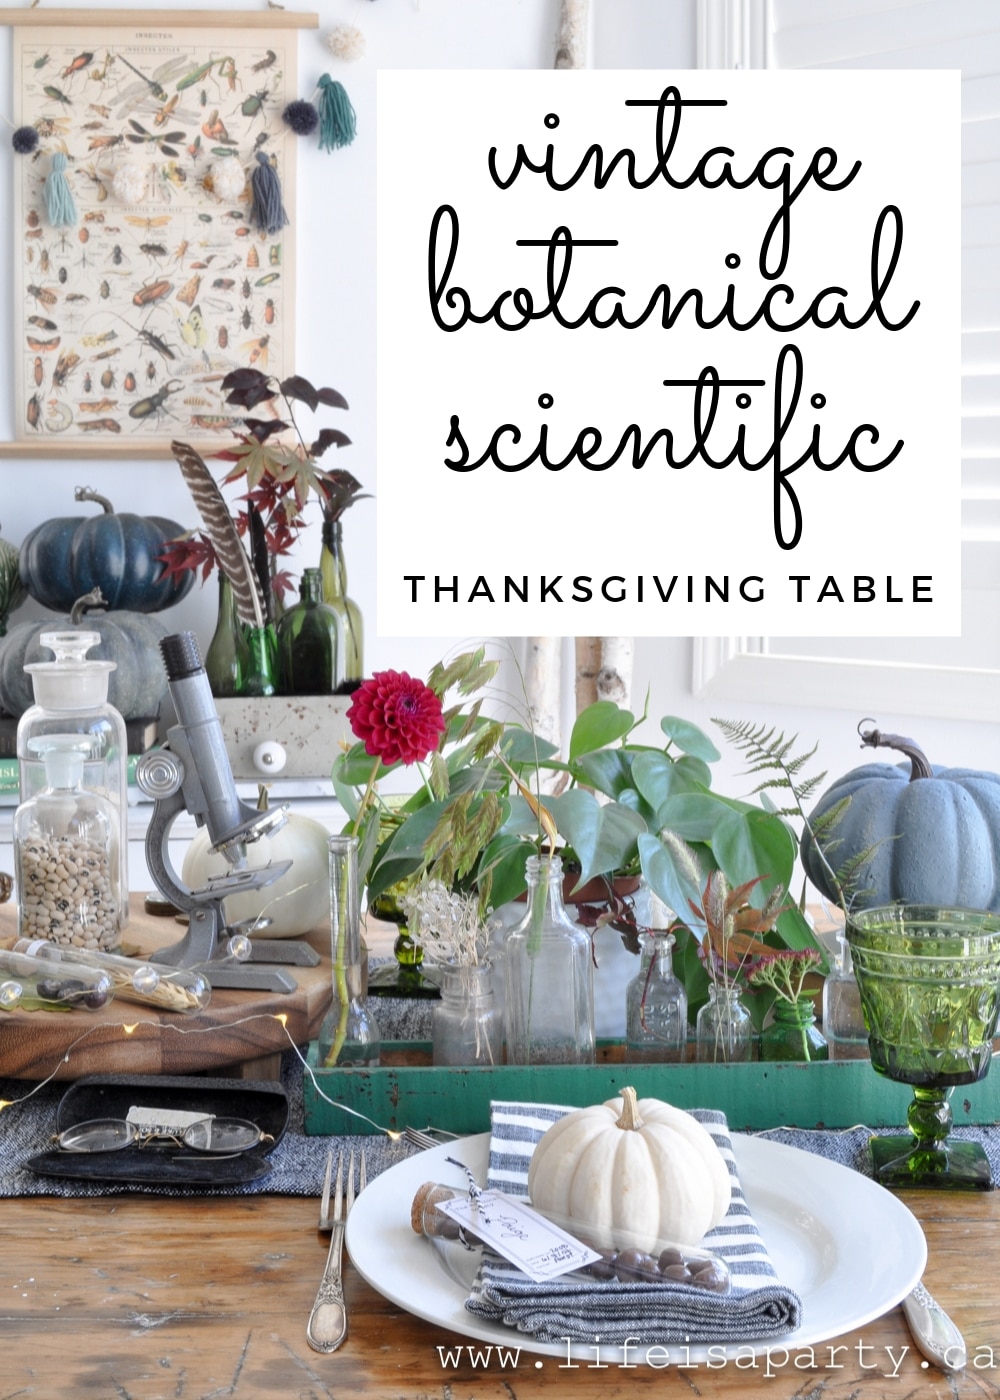 Vintage Botanical Scientific Thanksgiving Table: scientific glass, old books, a microscope, and lots of botanical specimens create a beautiful table.